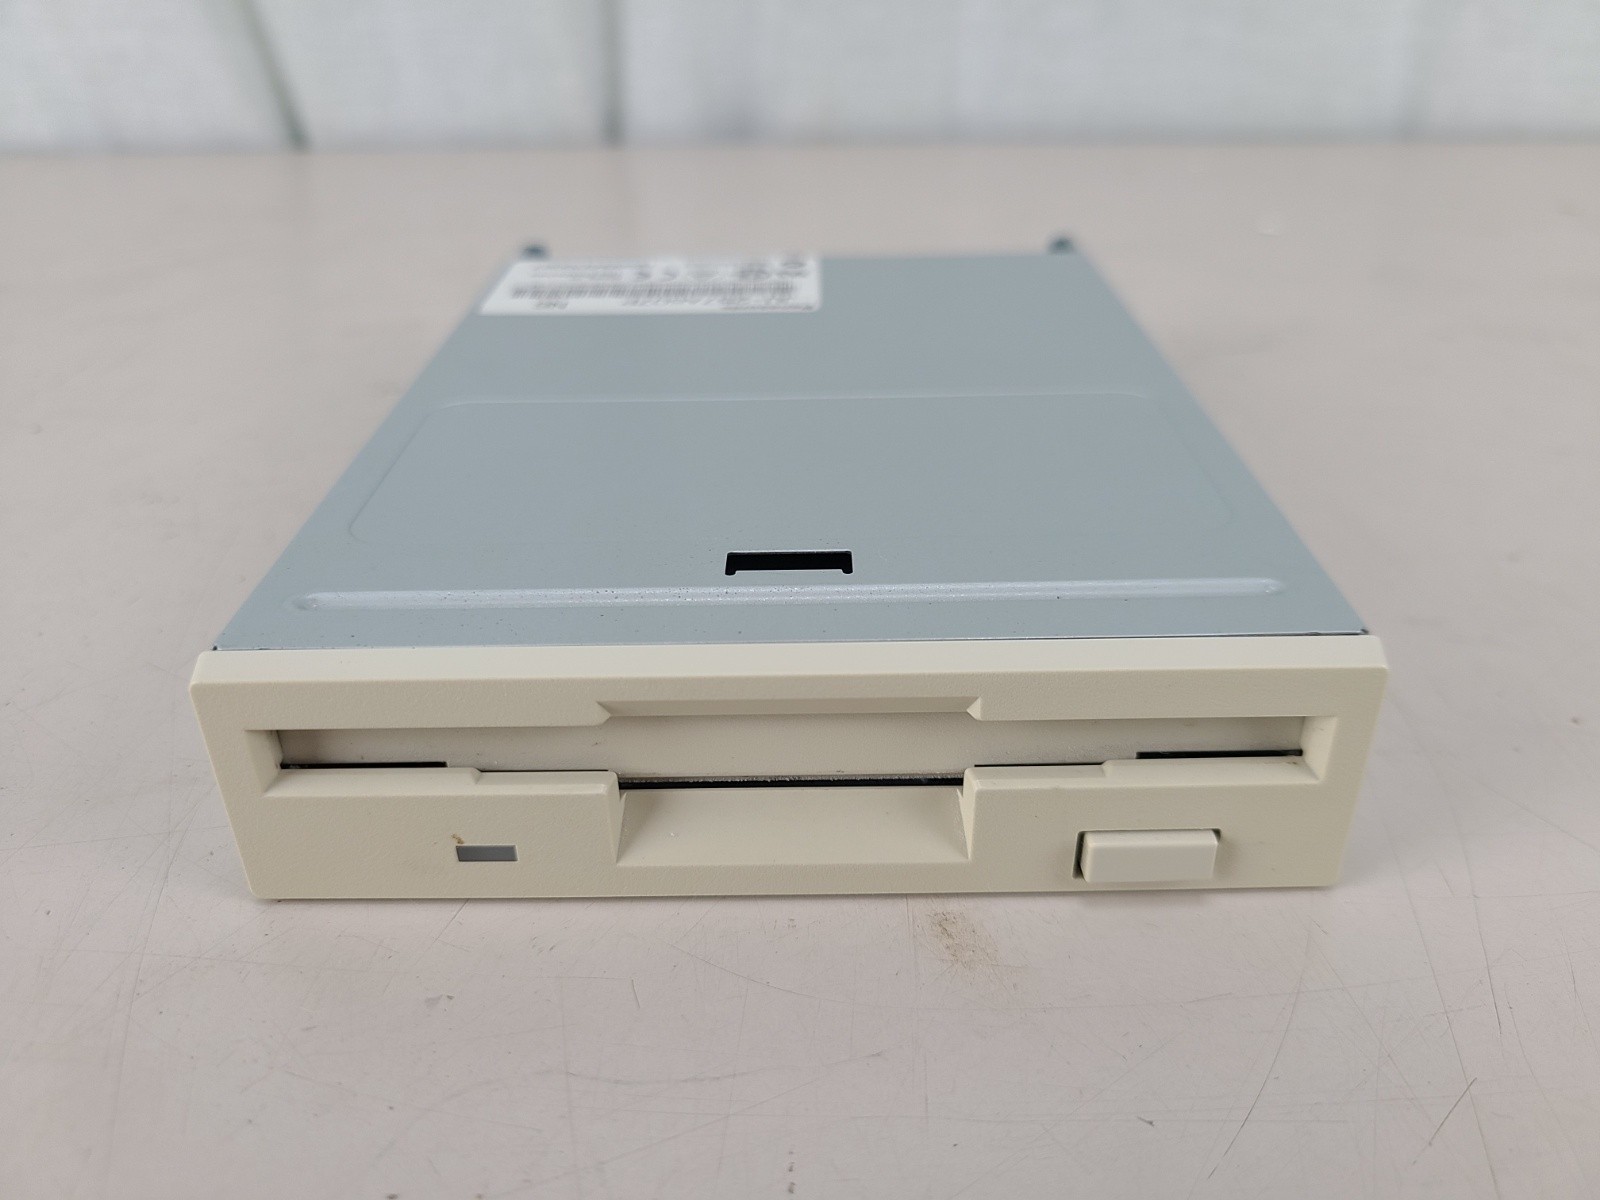 PANASONIC JU-257A826P 1.44MB FLOPPY DISK DRIVE WITH FACE PLATE BEIGE DS-TBL